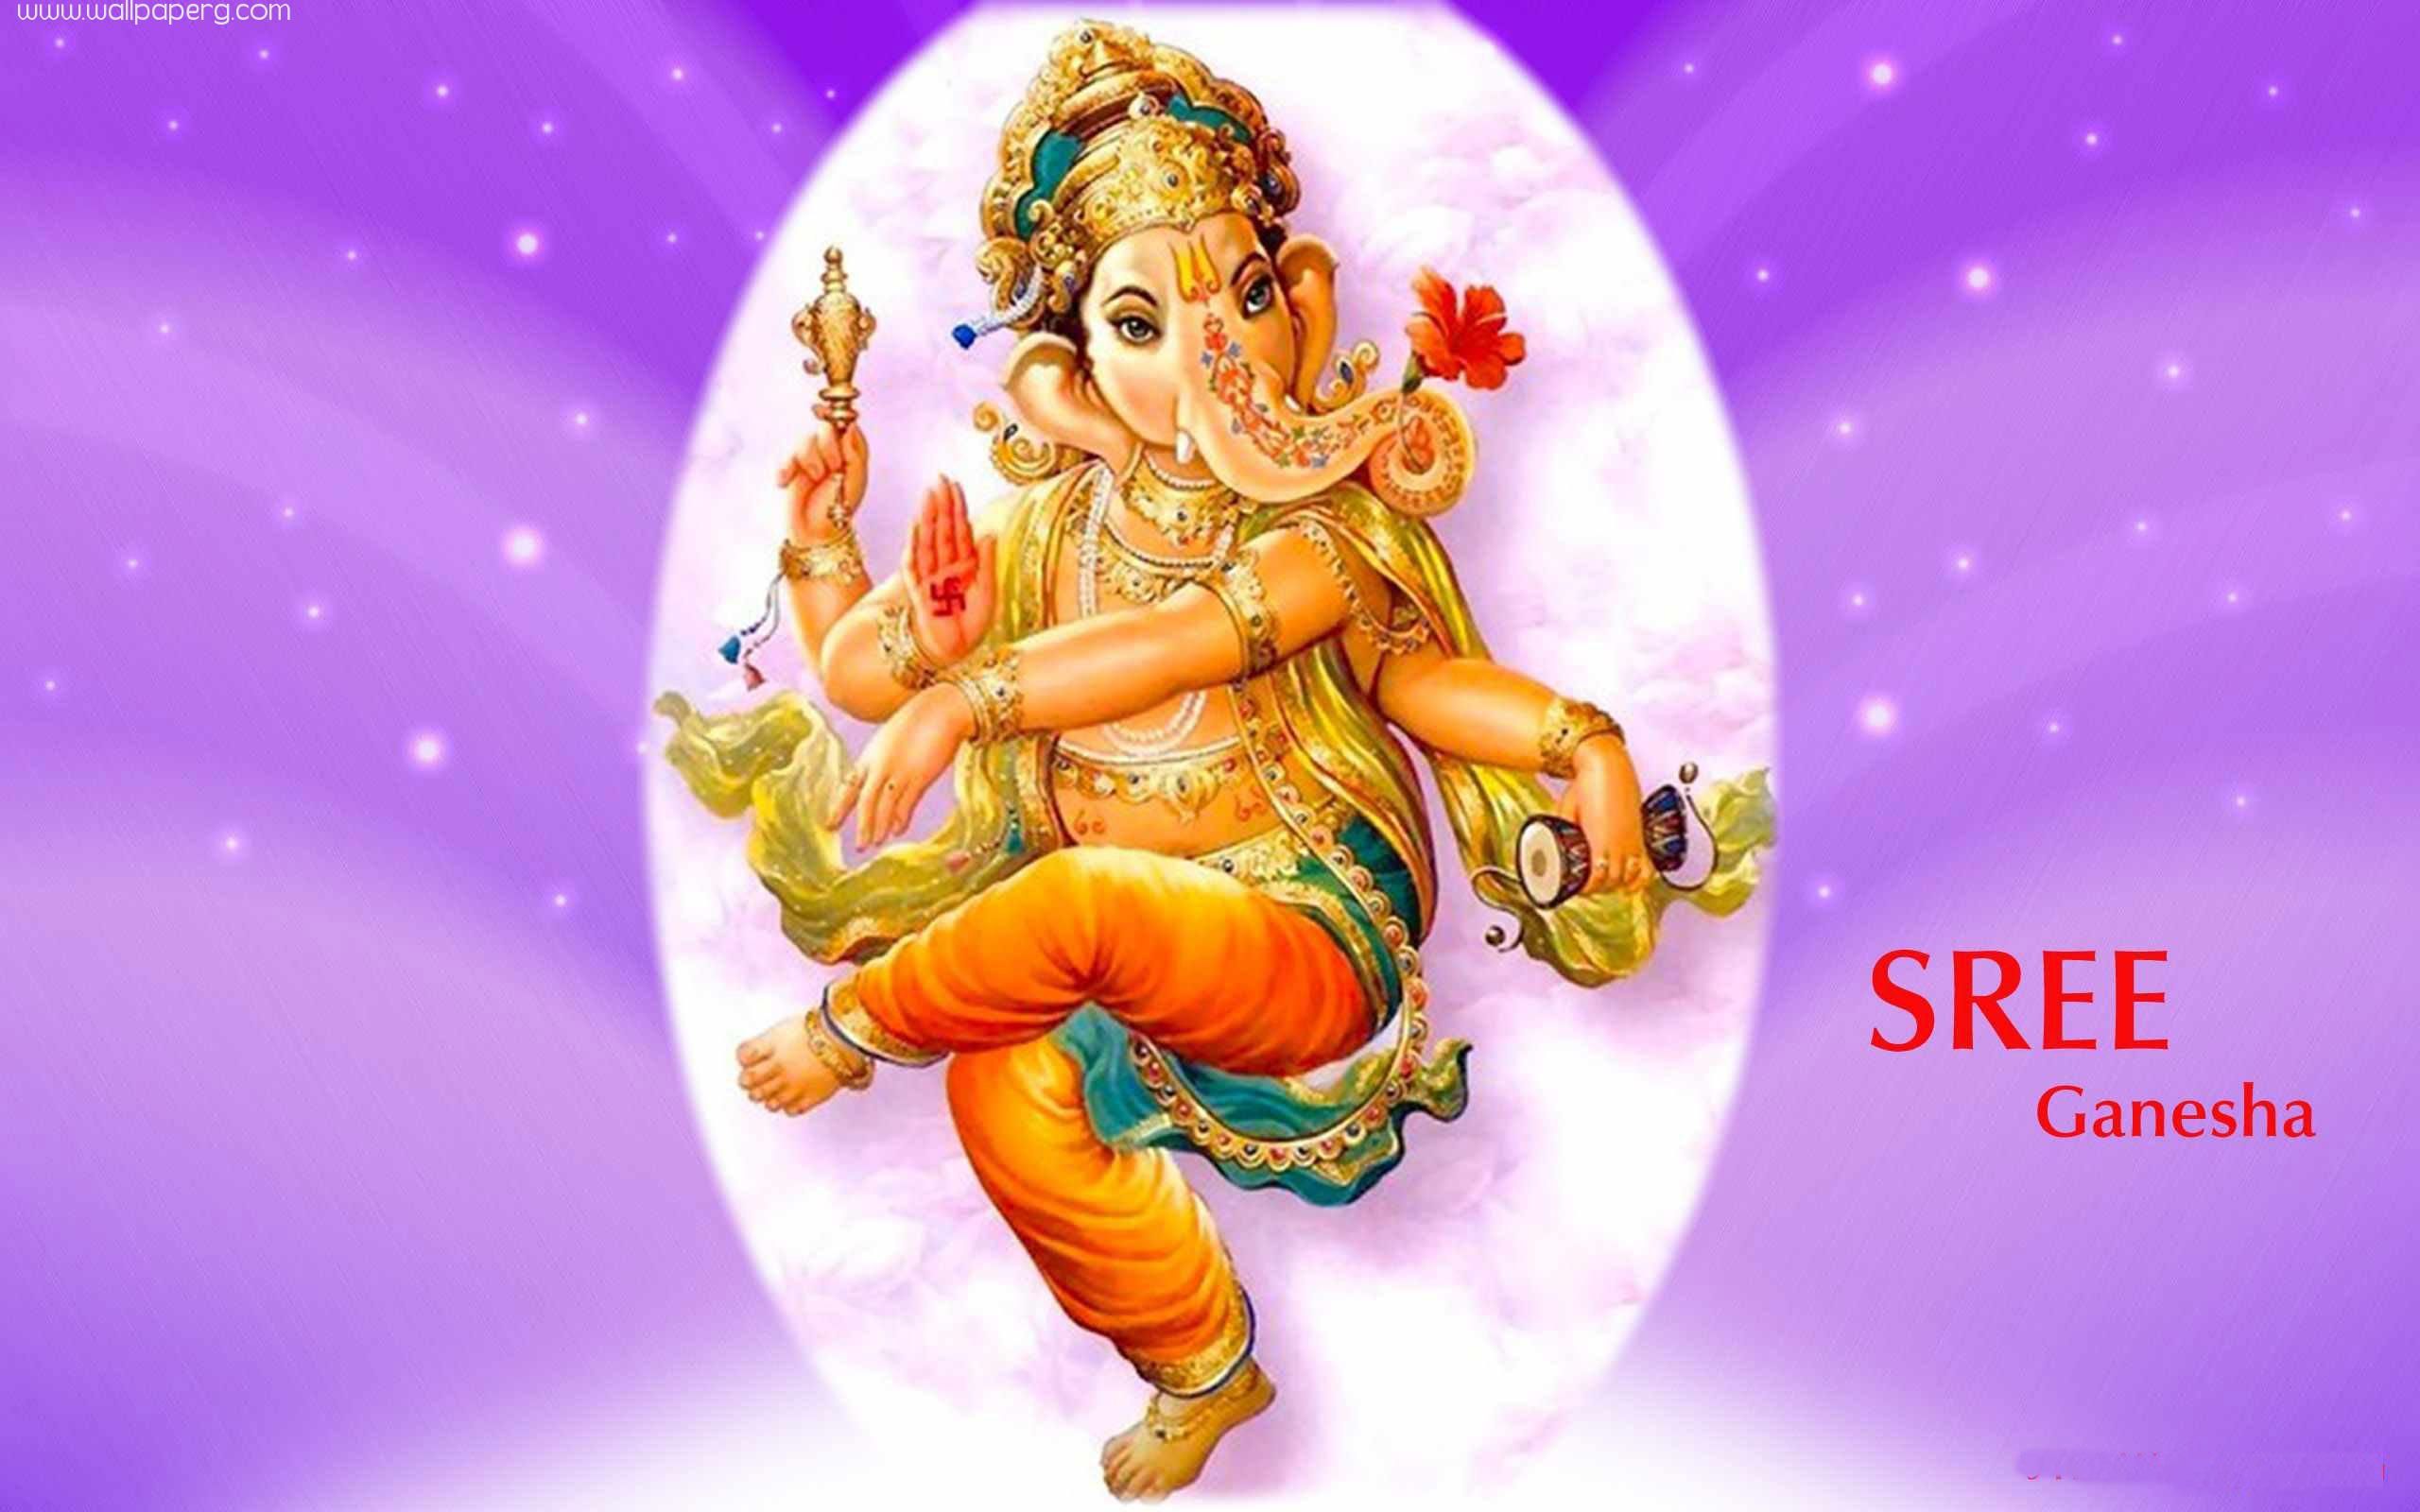 Download Shree ganesha ji chaturthi image for your mobile cell phone